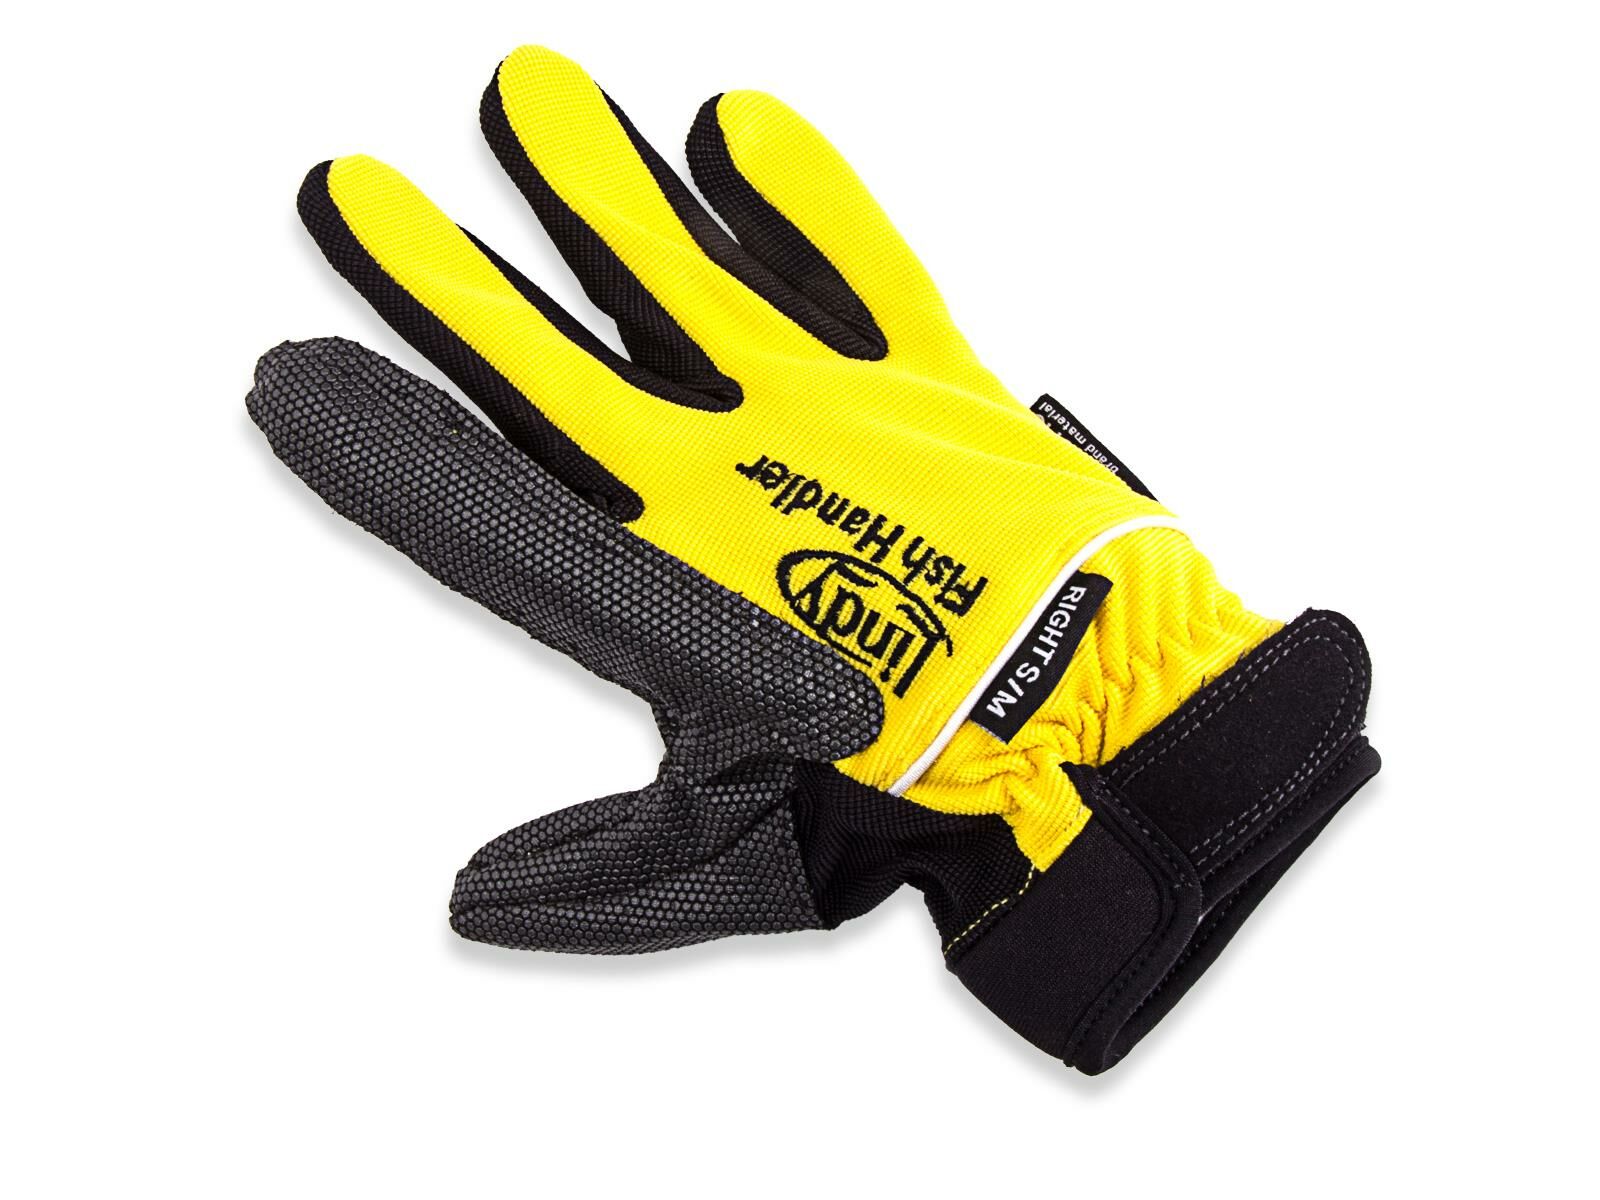 Lindy Fish Handling Glove - Right Size S/M